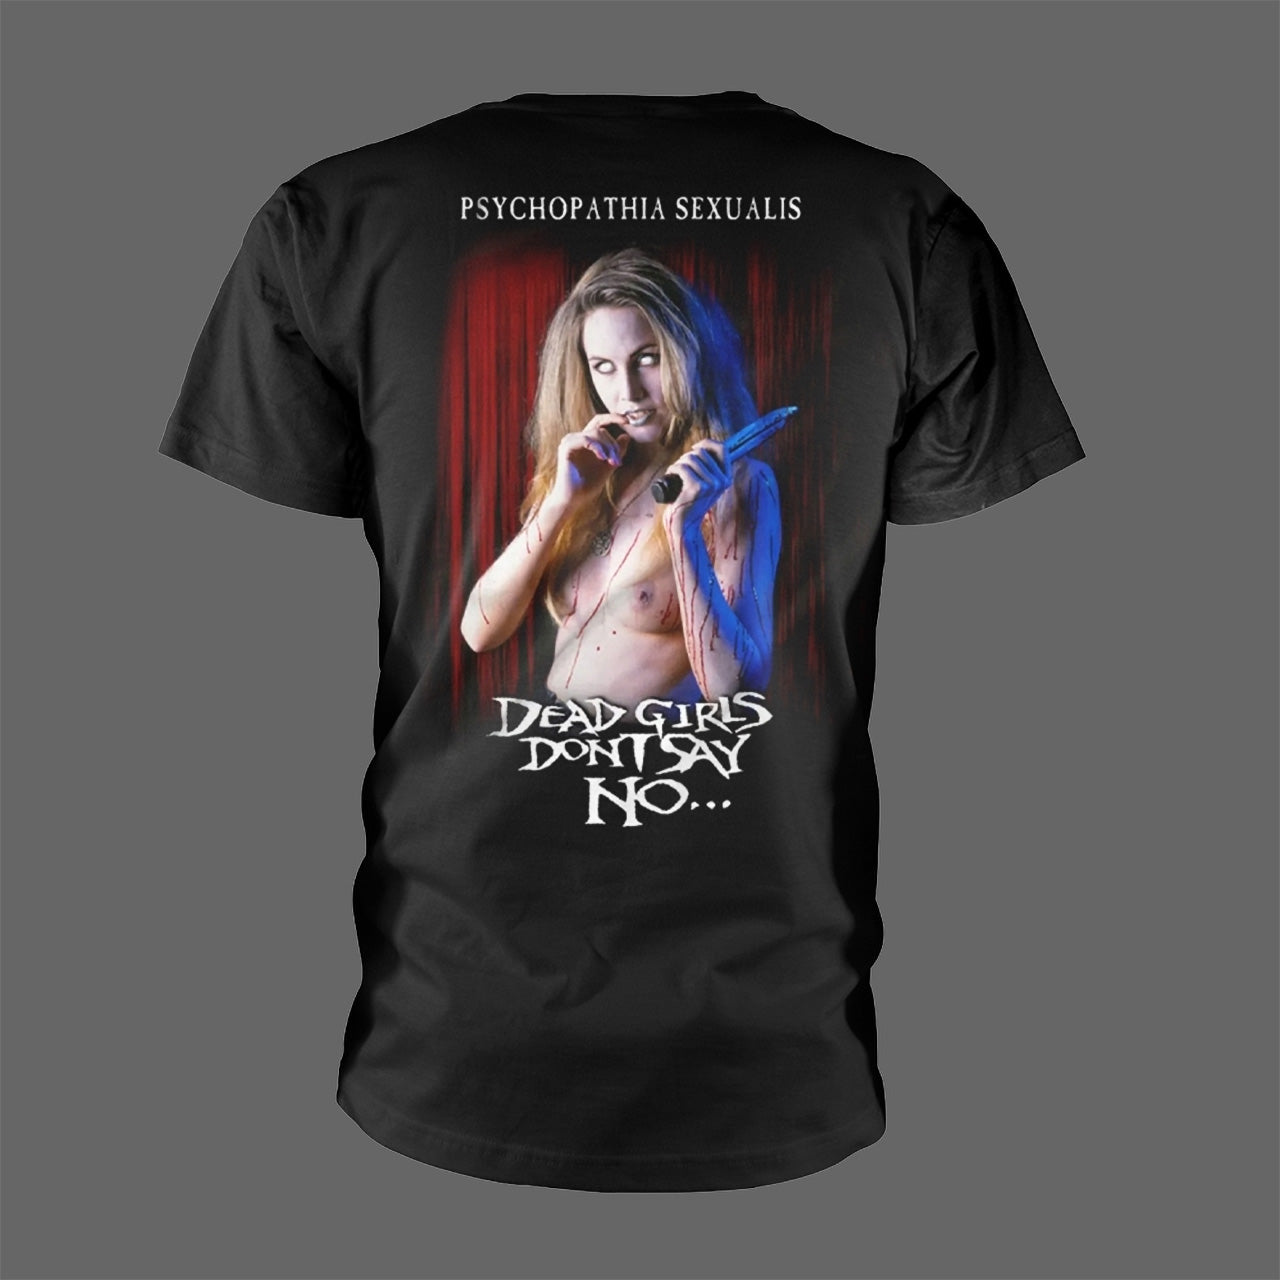 Cradle of Filth - Dead Girls Don't Say No (T-Shirt)